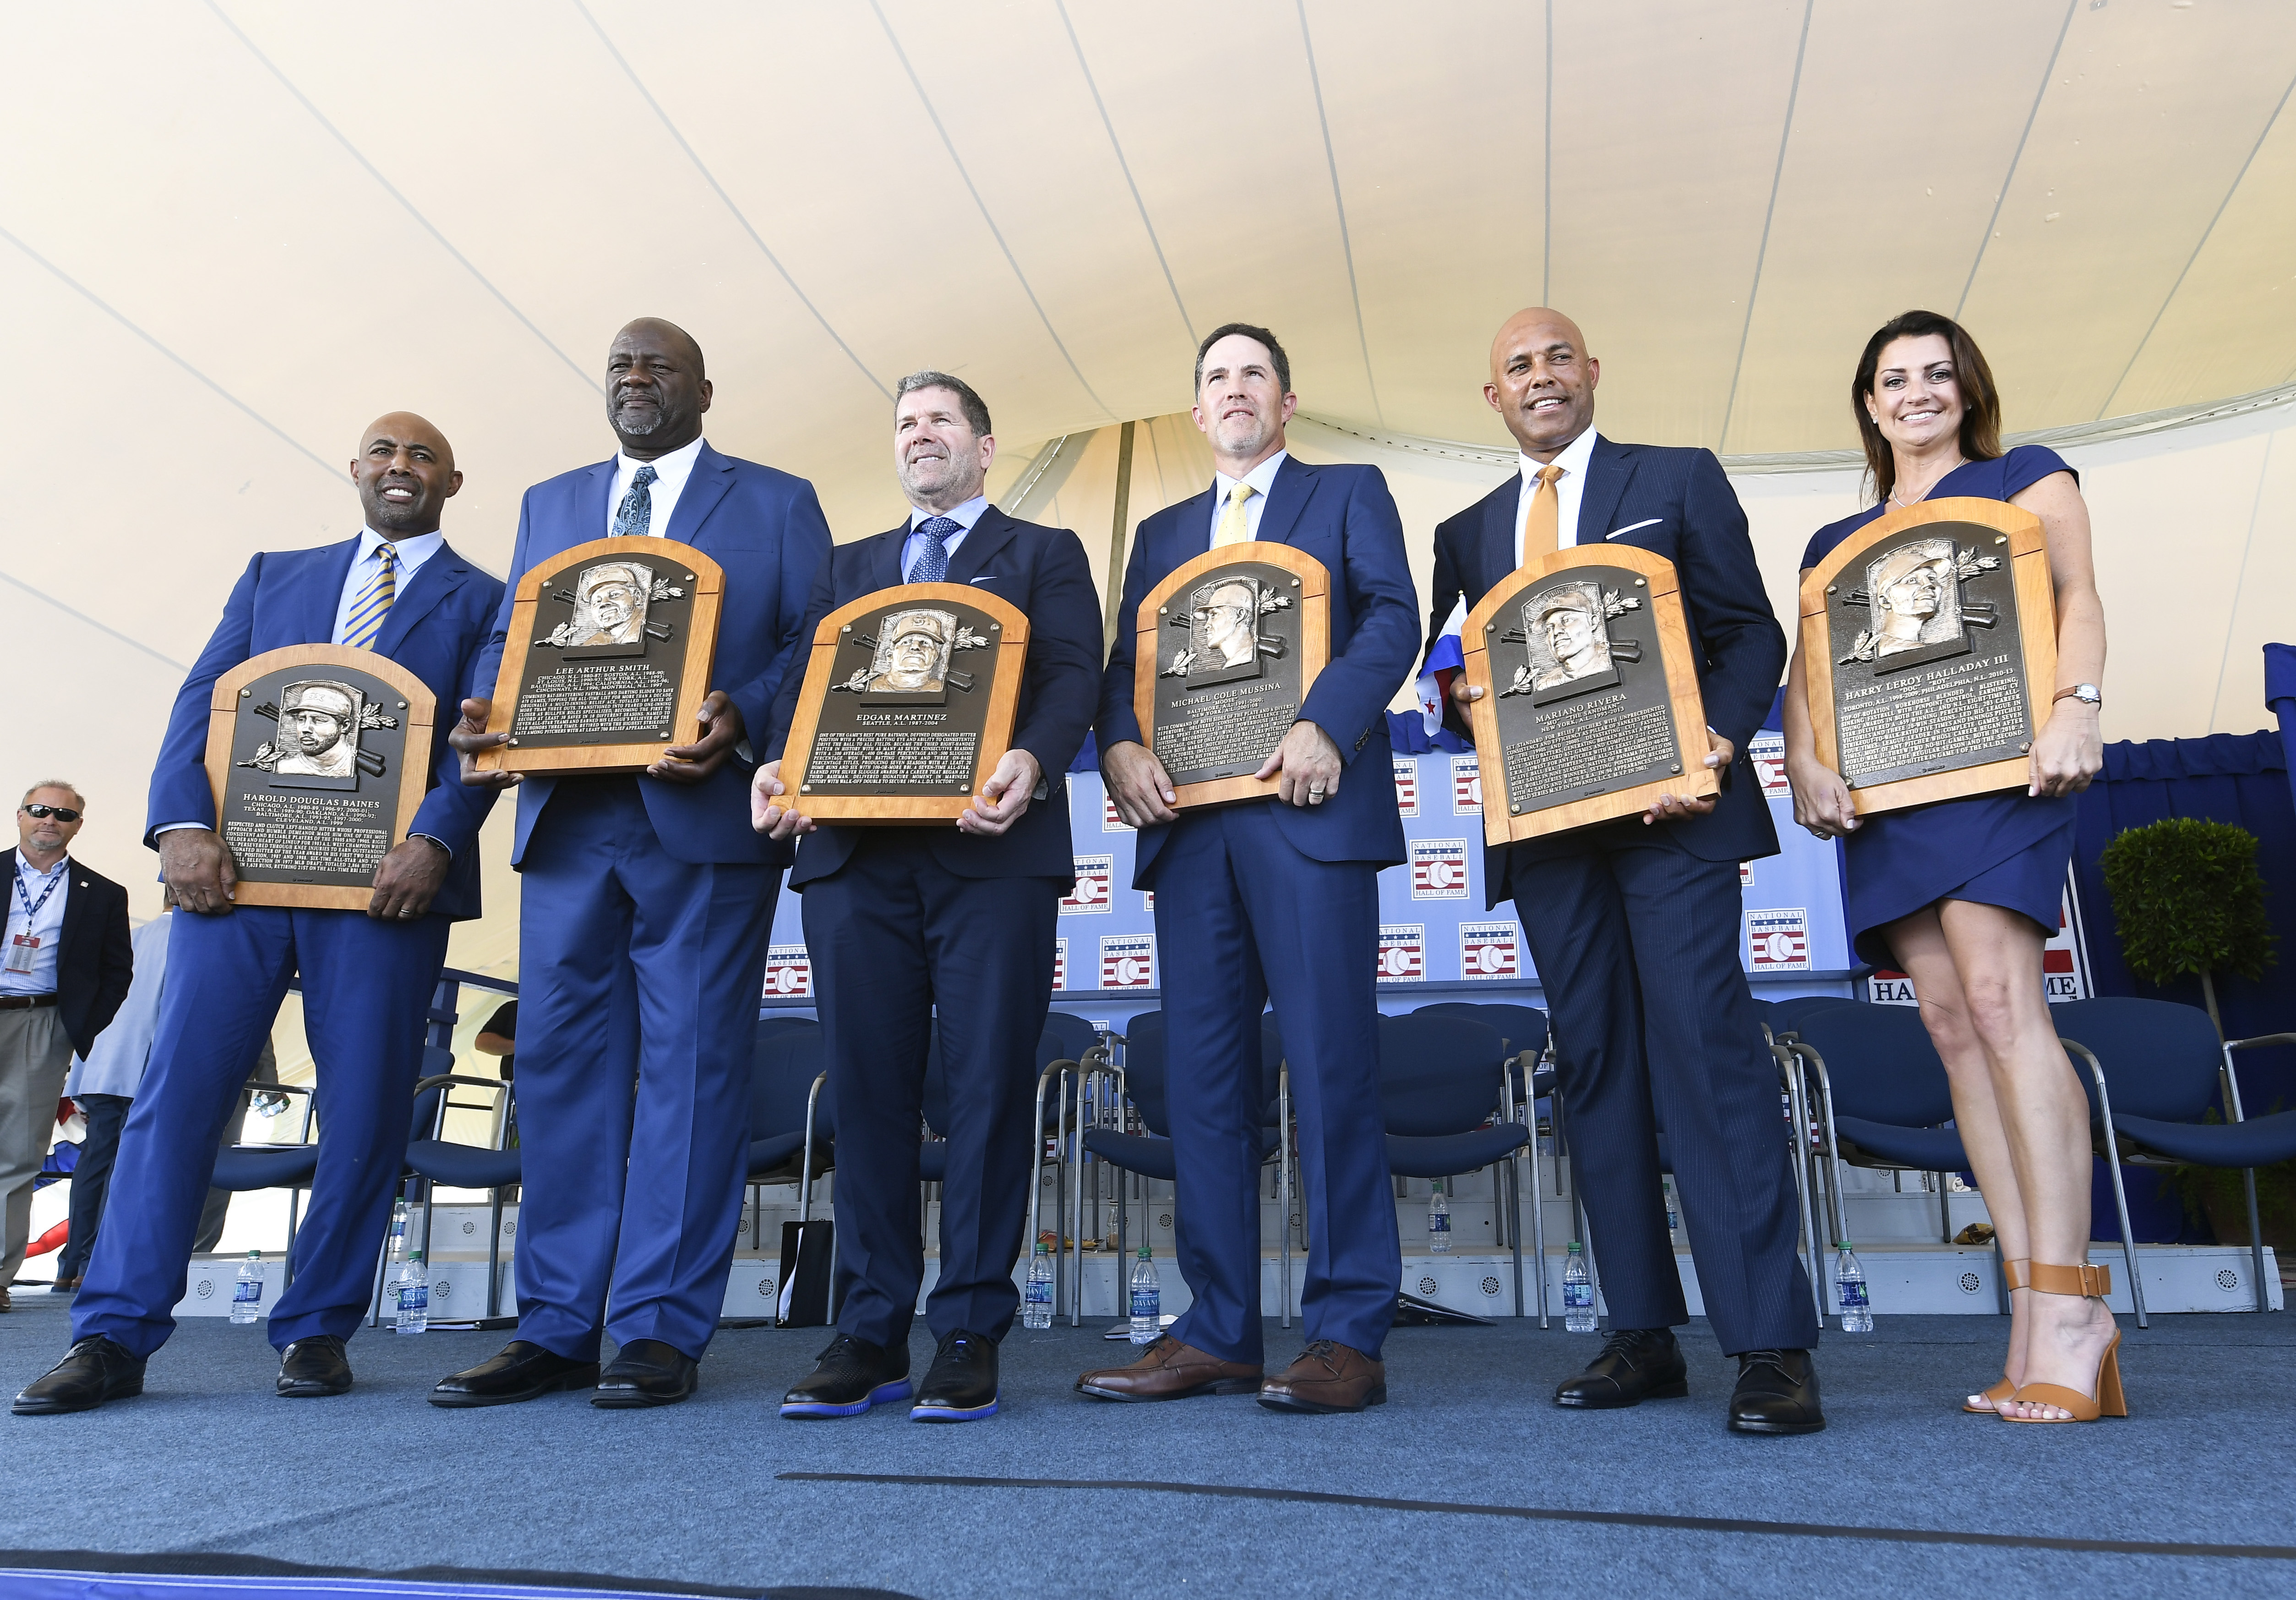 Baseball Hall of Fame induction week - All Photos 